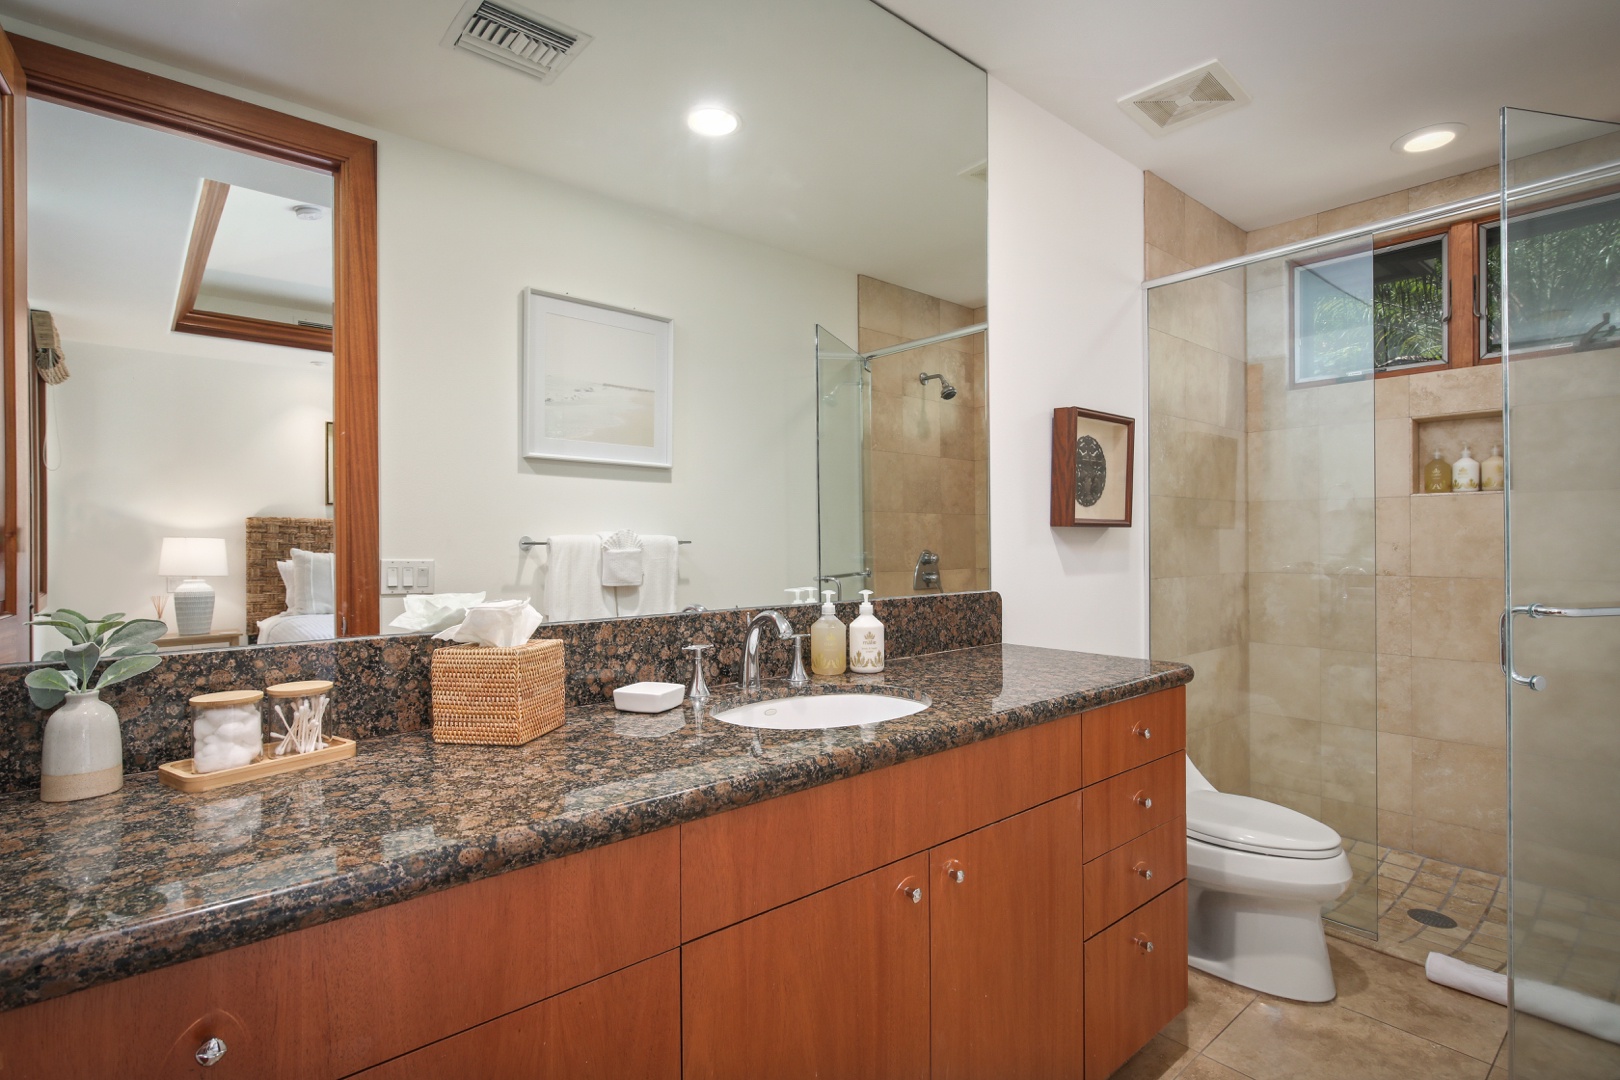 Kailua Kona Vacation Rentals, 4BD Pakui Street (147) Estate Home at Four Seasons Resort at Hualalai - Guest Suite #2’s en suite bath with large vanity and glass enclosed shower.